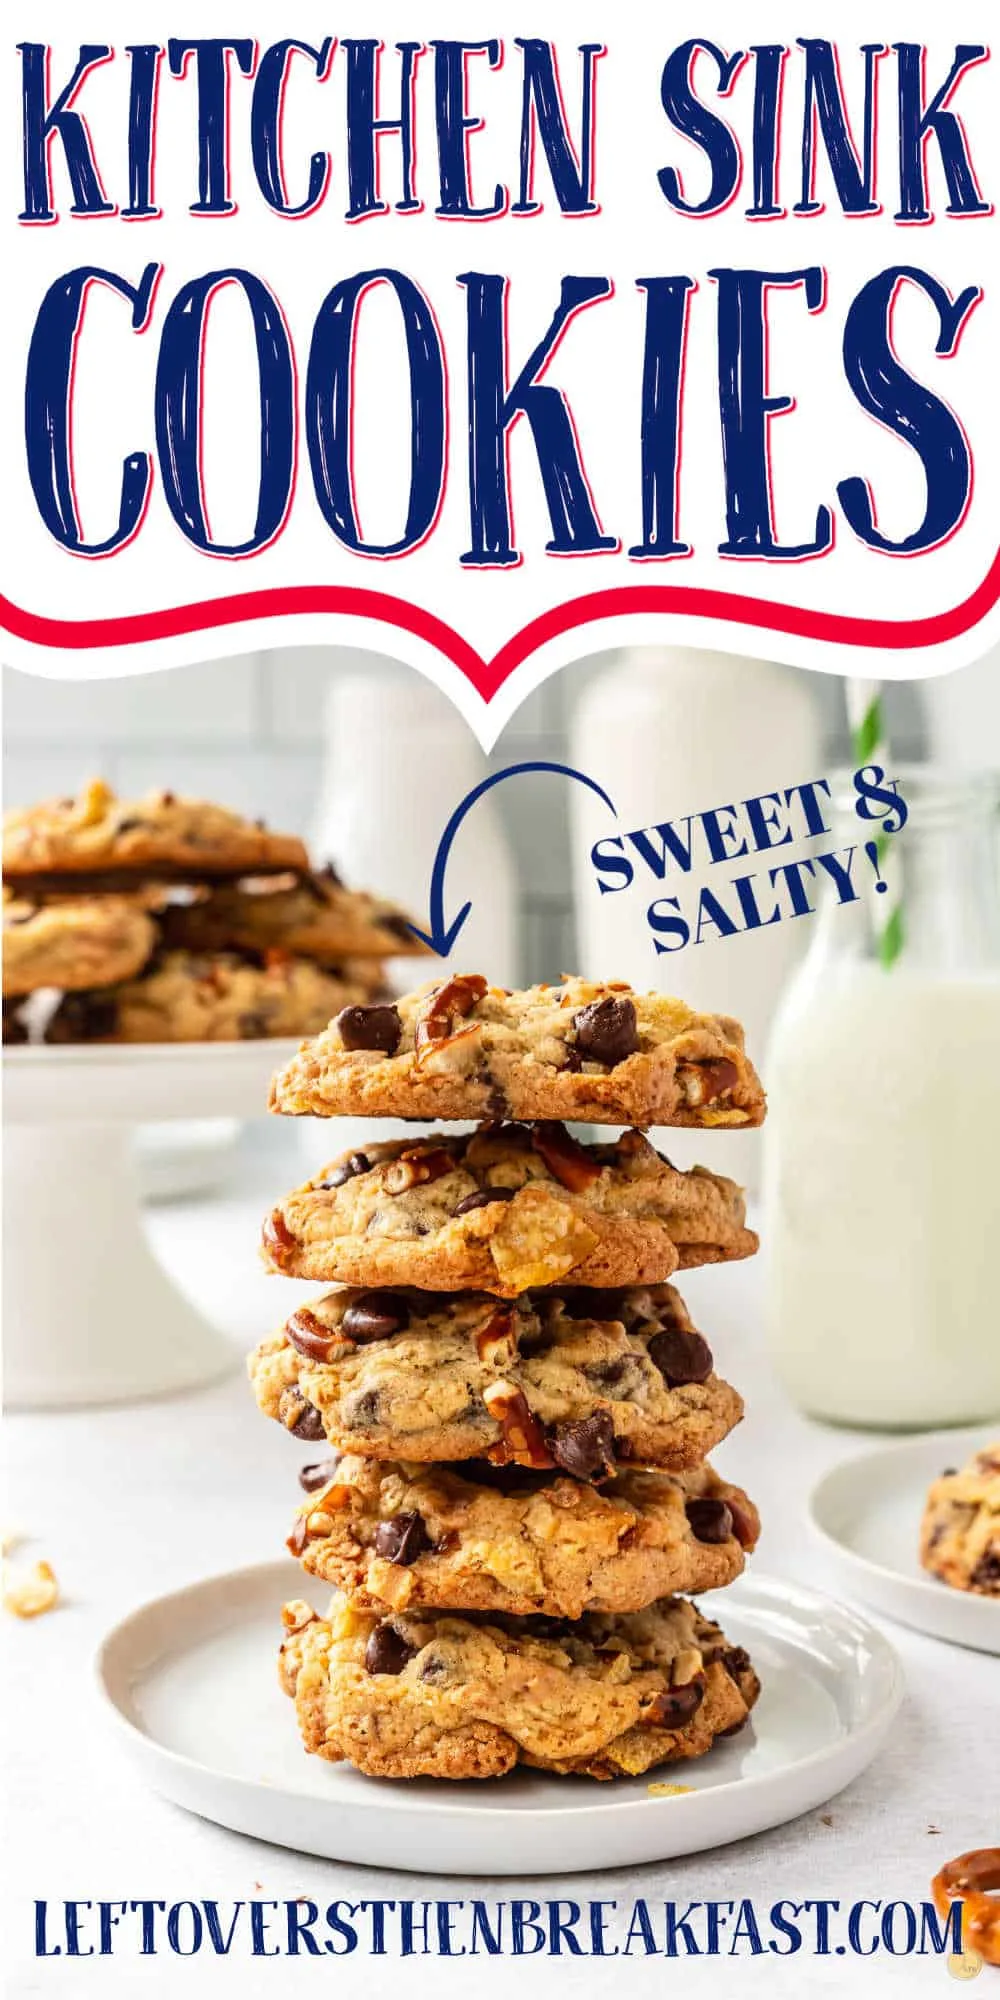 stack of cookies with text "kitchen sink cookies"